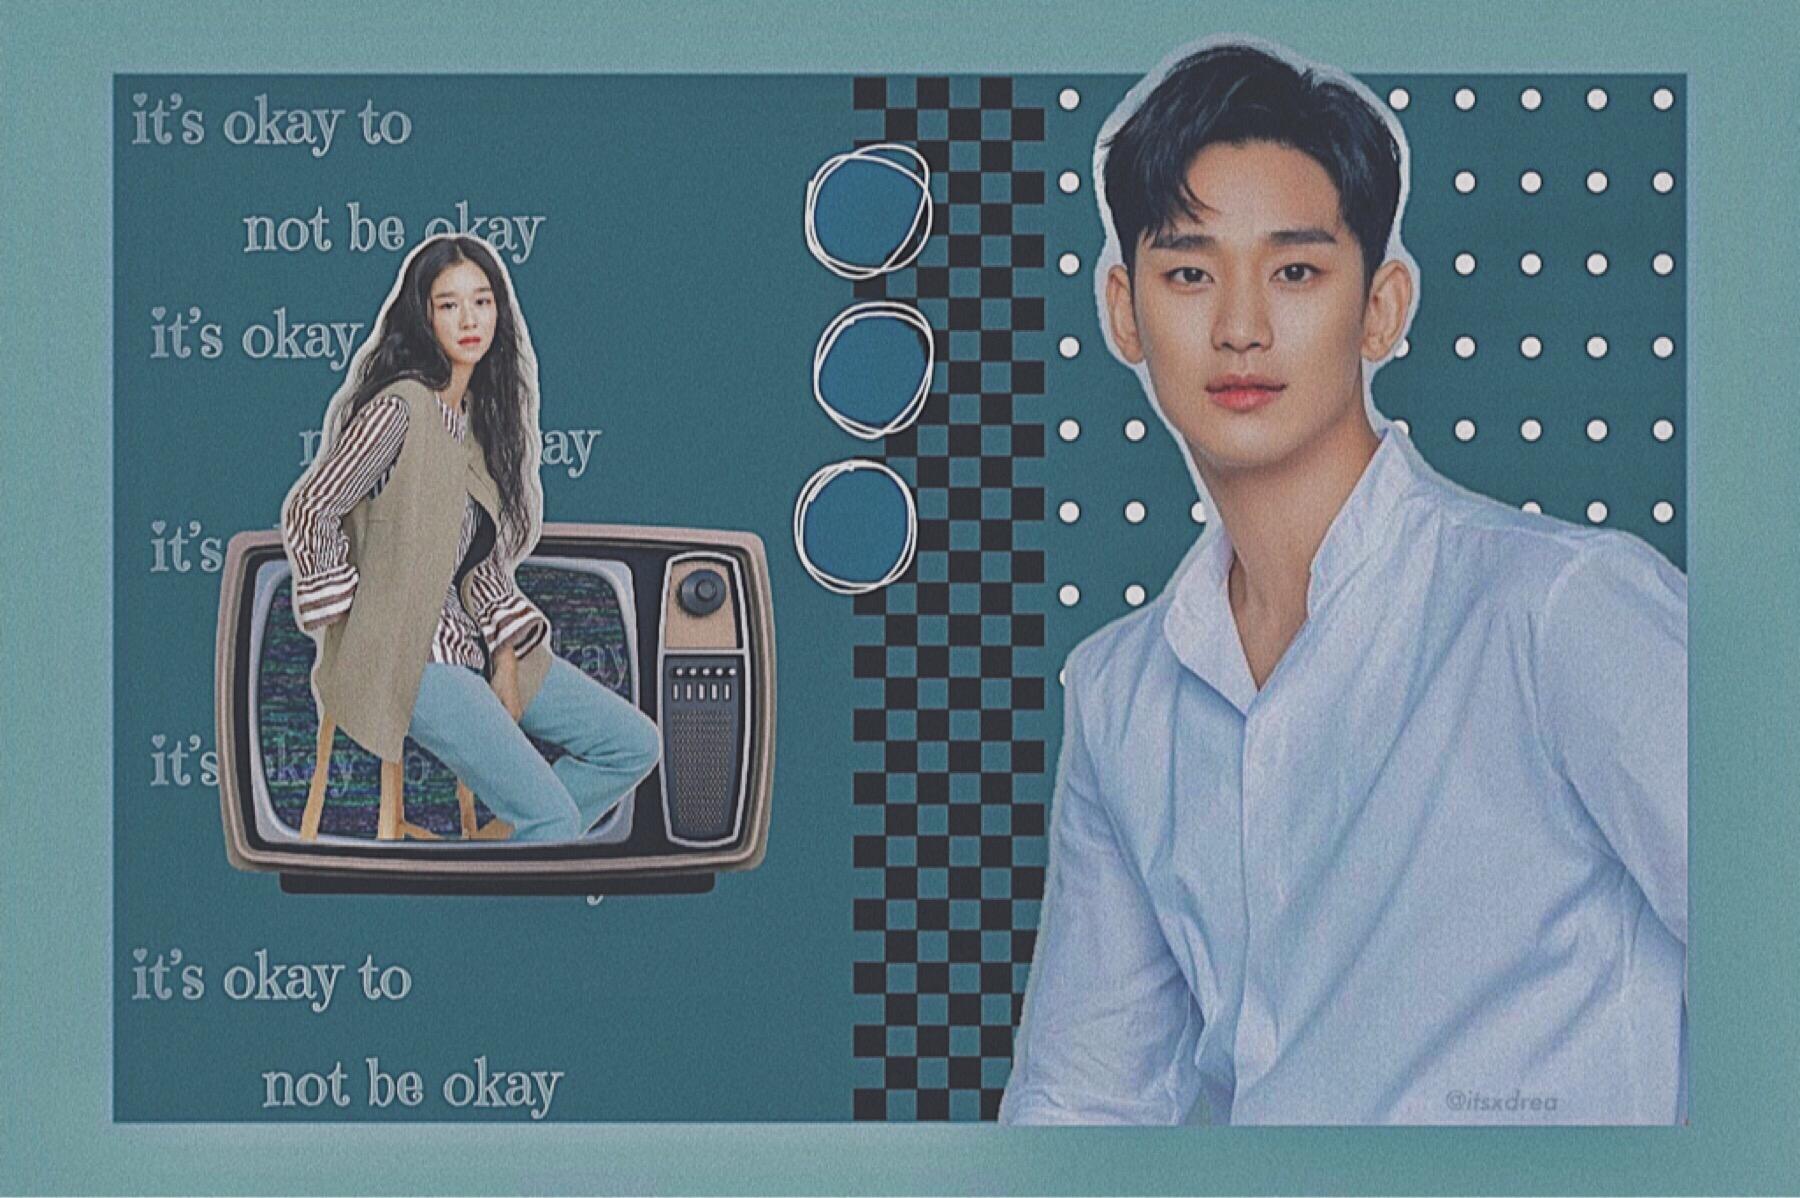 🦚
• kim soo hyun & seo ye ji // actor & actress •
| inspired by whi |
ur prolly annoyed w my spamming, but i’ve been dYING to post this. this show is IMMACULATE and kim soo hyun is just *chefs kiss*. kinda sad it’s ending, but i highly recommend🤧